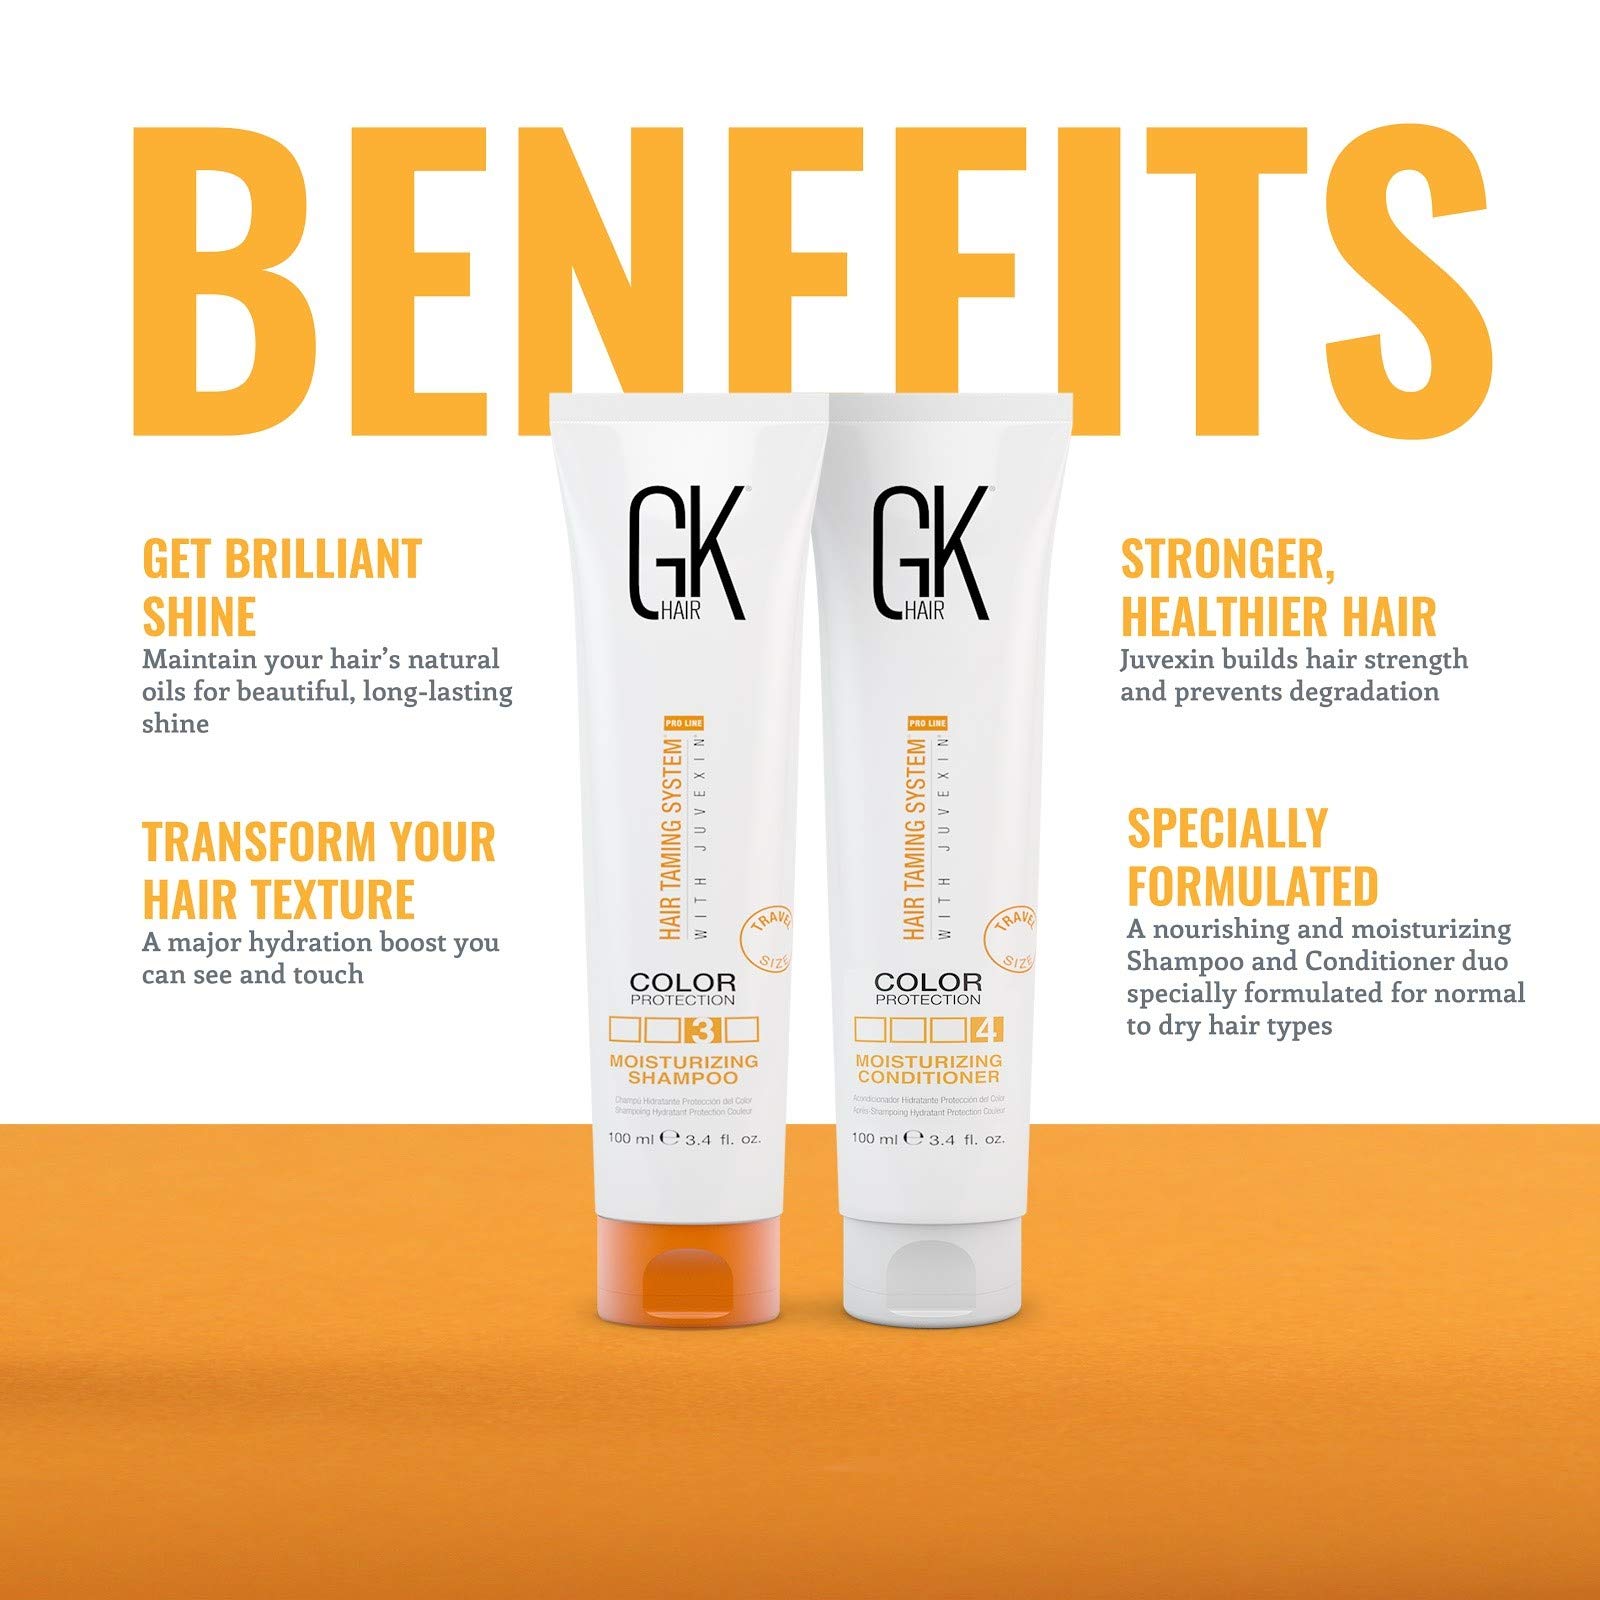 GK HAIR Global Keratin Moisturizing Shampoo and Conditioner Sets (3.4 Oz/100ml) with Leave In Cashmere Smoothing Styling Cream (1.69 Fl Oz/50ml) for Color Treated Dry Damaged Frizzy Hair